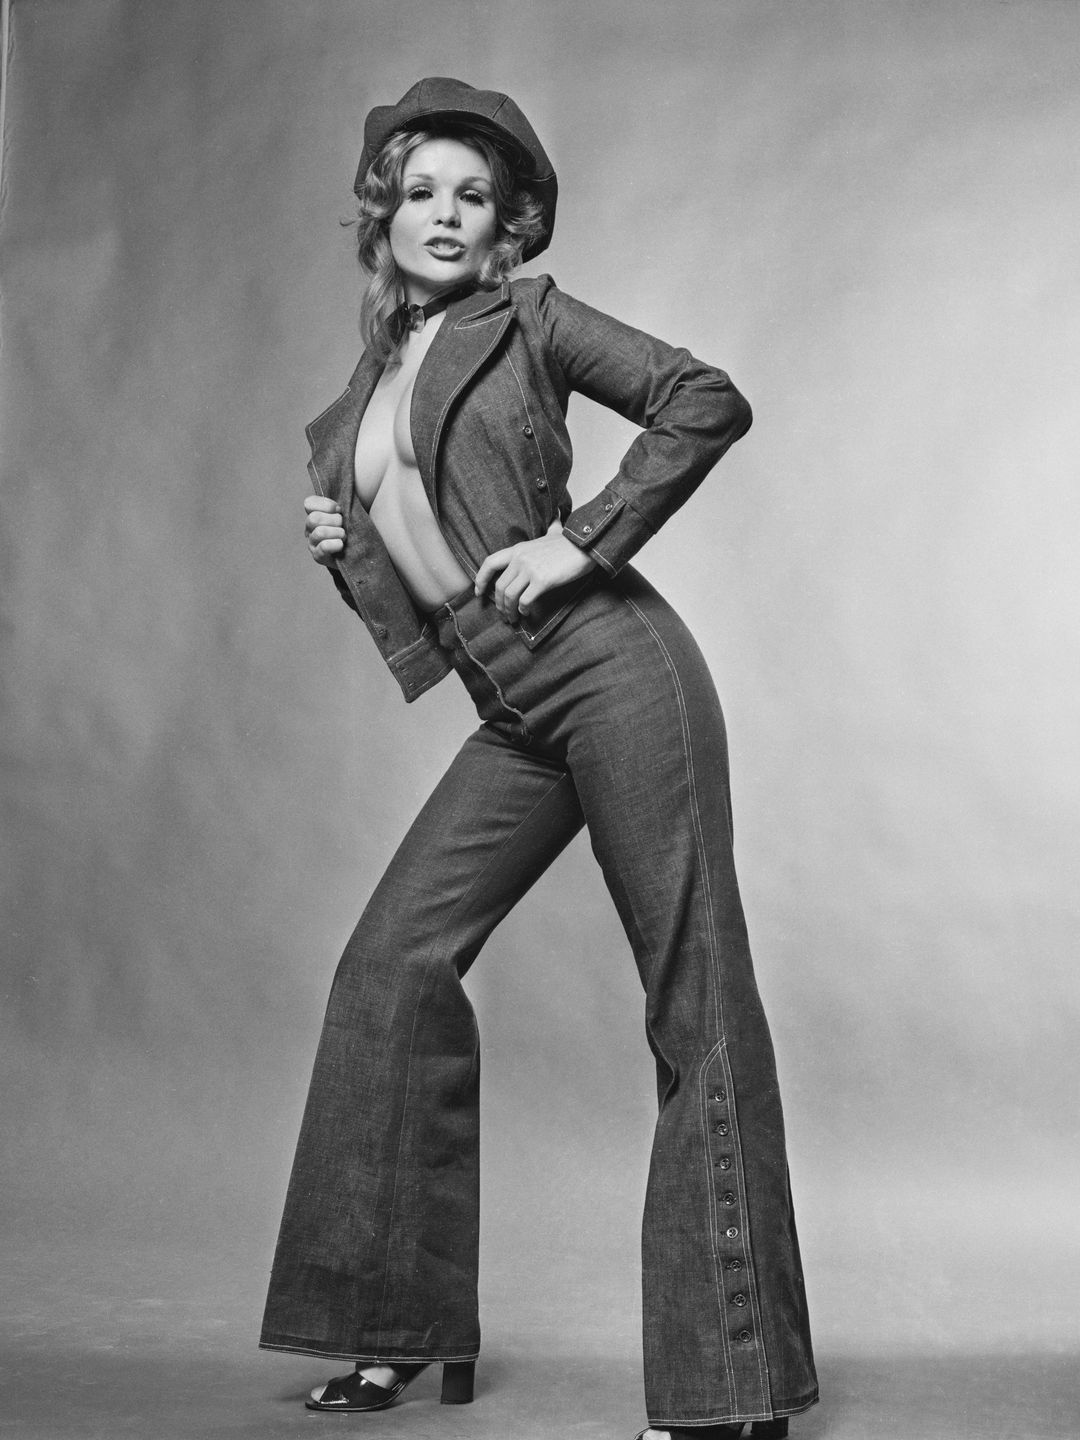 Bell bottoms and wooden platform shoes.70's fashion.